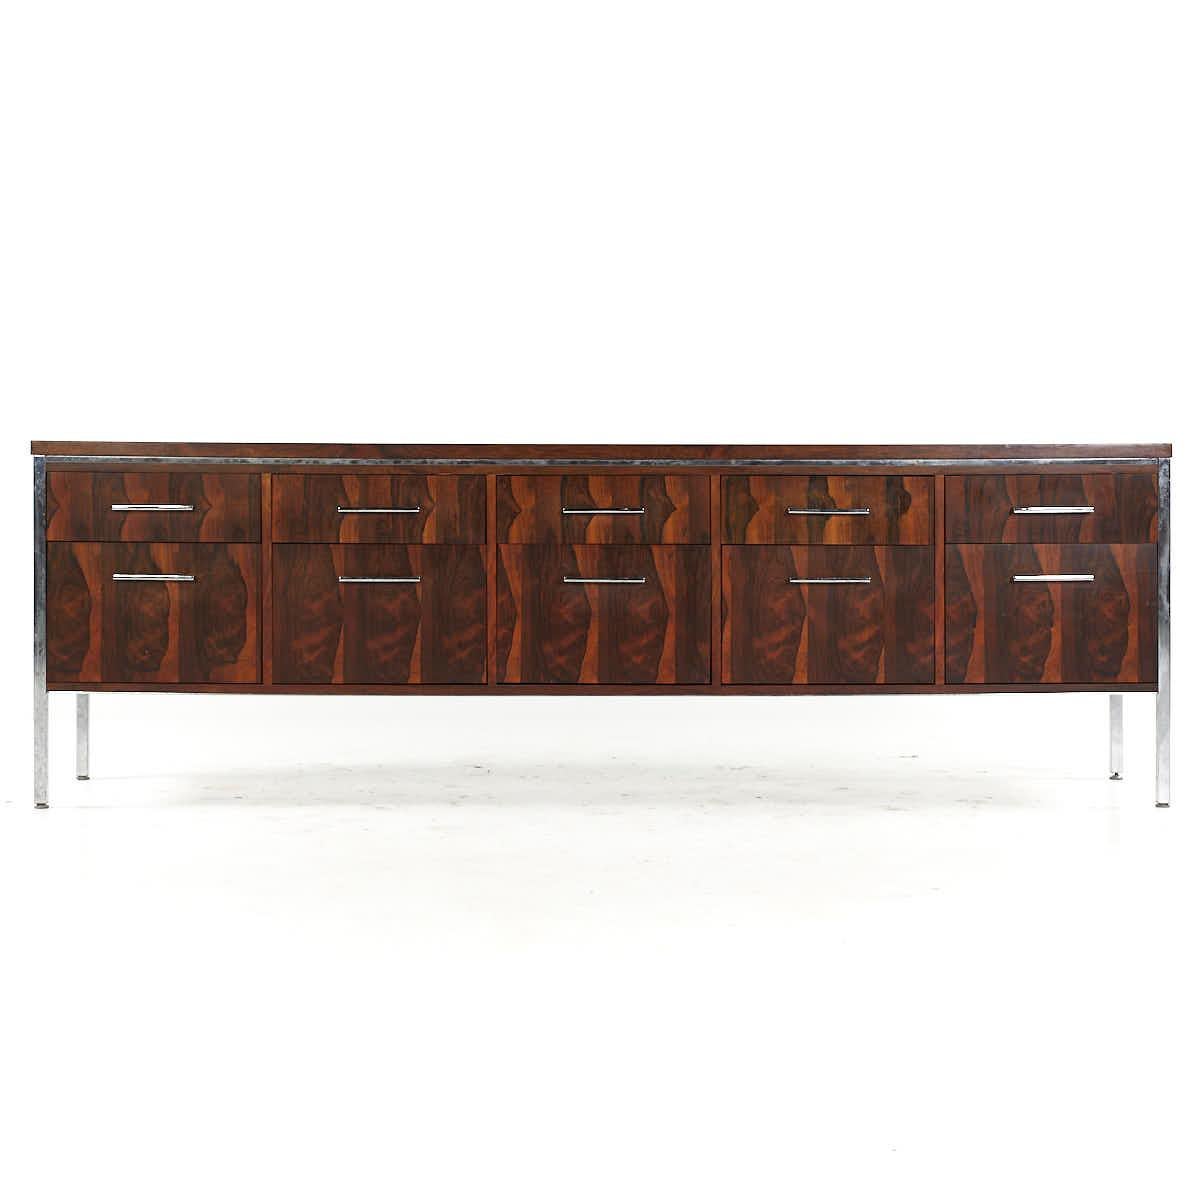 Florence Knoll Style Mid Century Rosewood and Chrome File Credenza

This credenza measures: 90.75 wide x 18 deep x 29.25 inches high

All pieces of furniture can be had in what we call restored vintage condition. That means the piece is restored